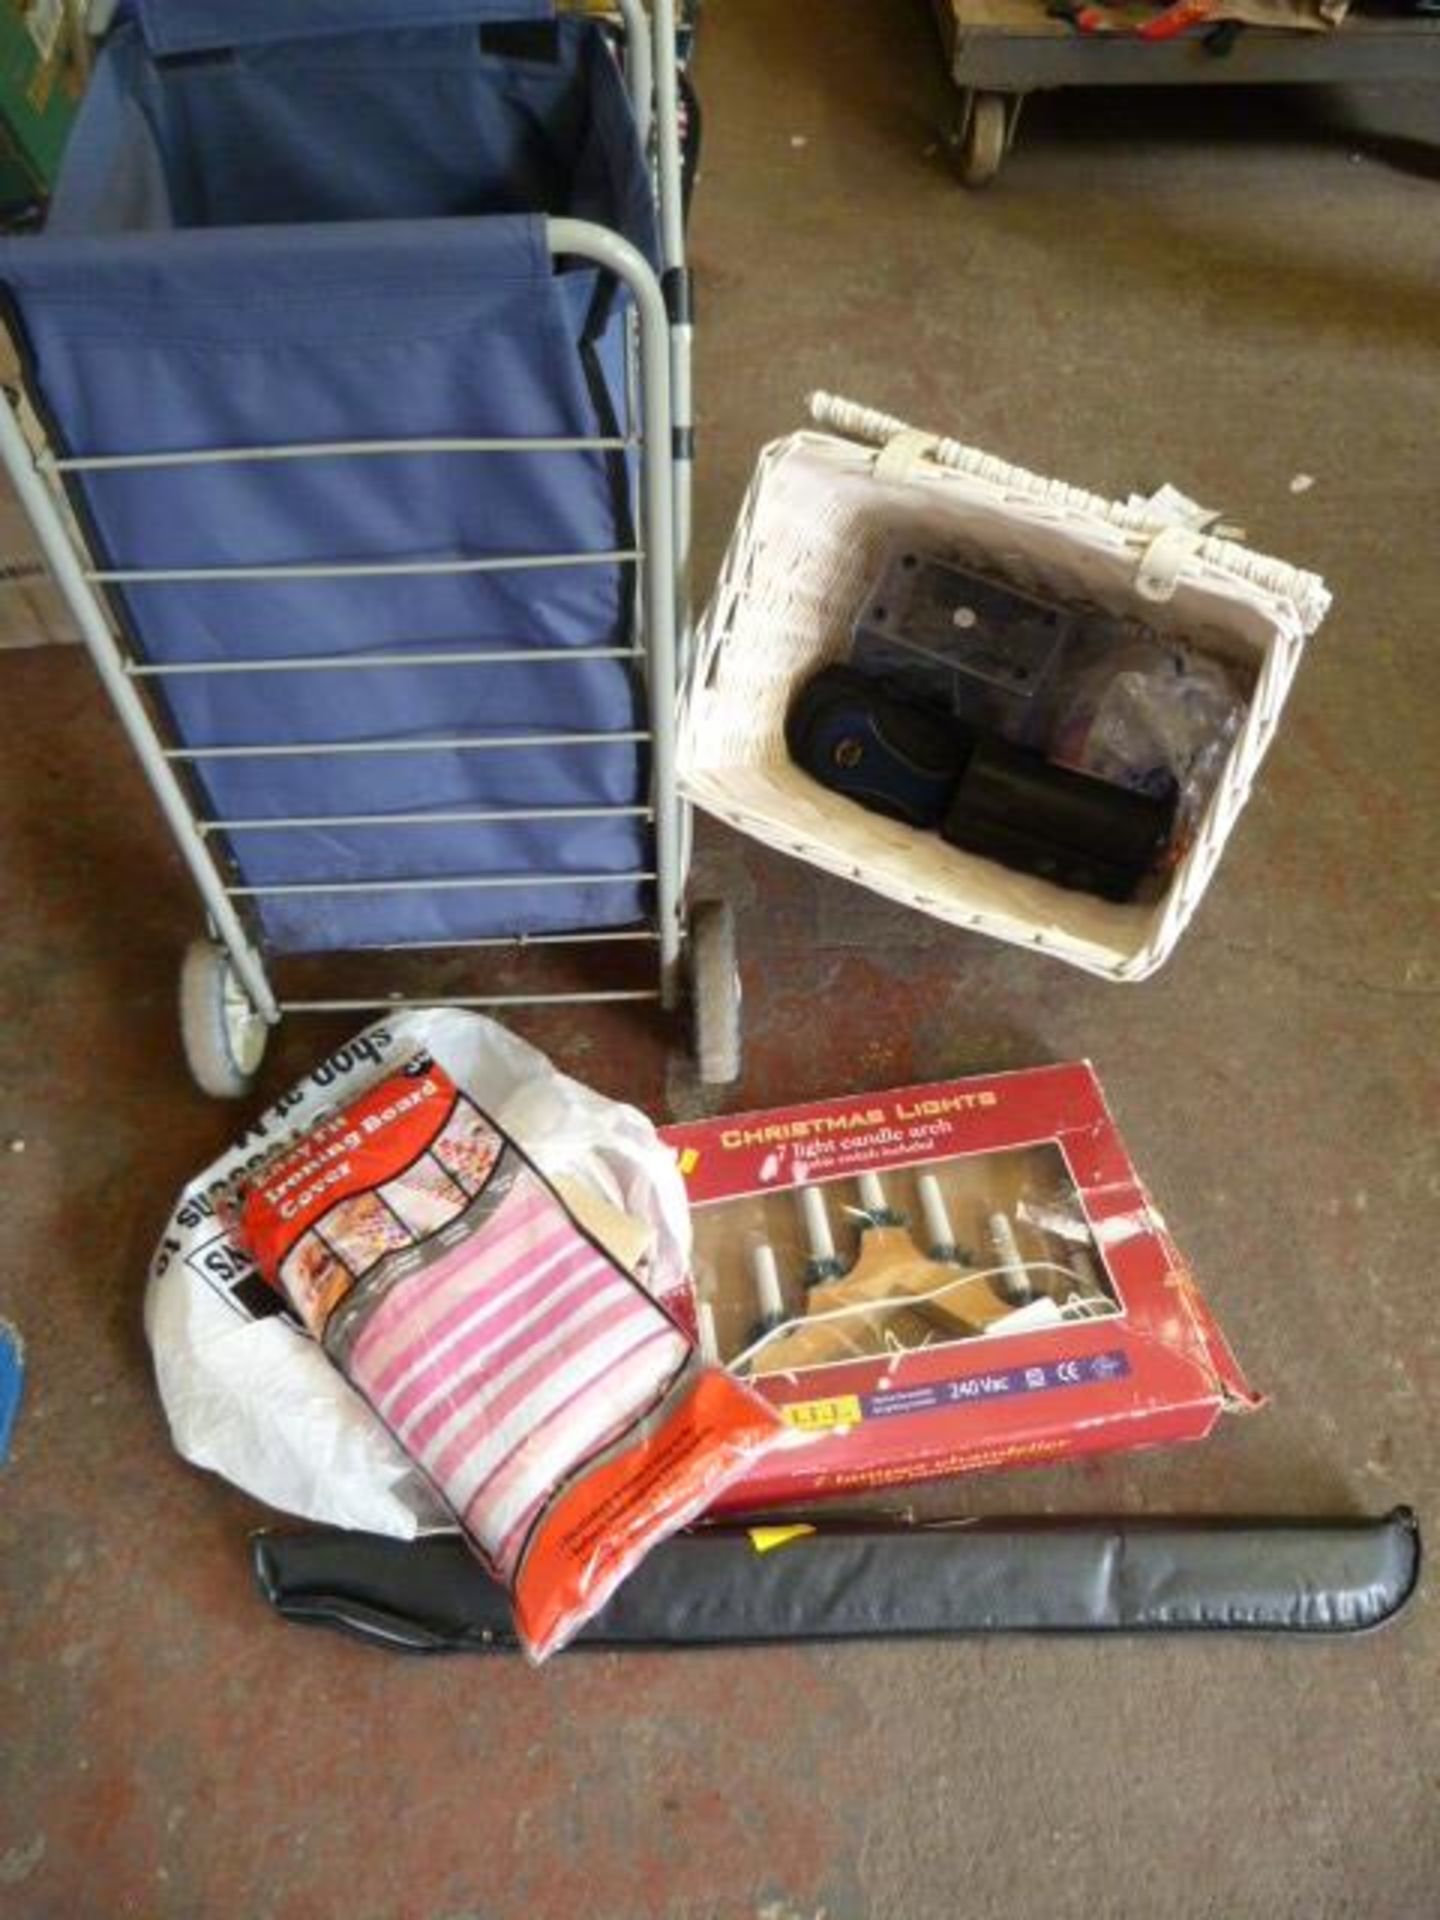 Shopping Trolley, Wicker Linen Basket and Sundries